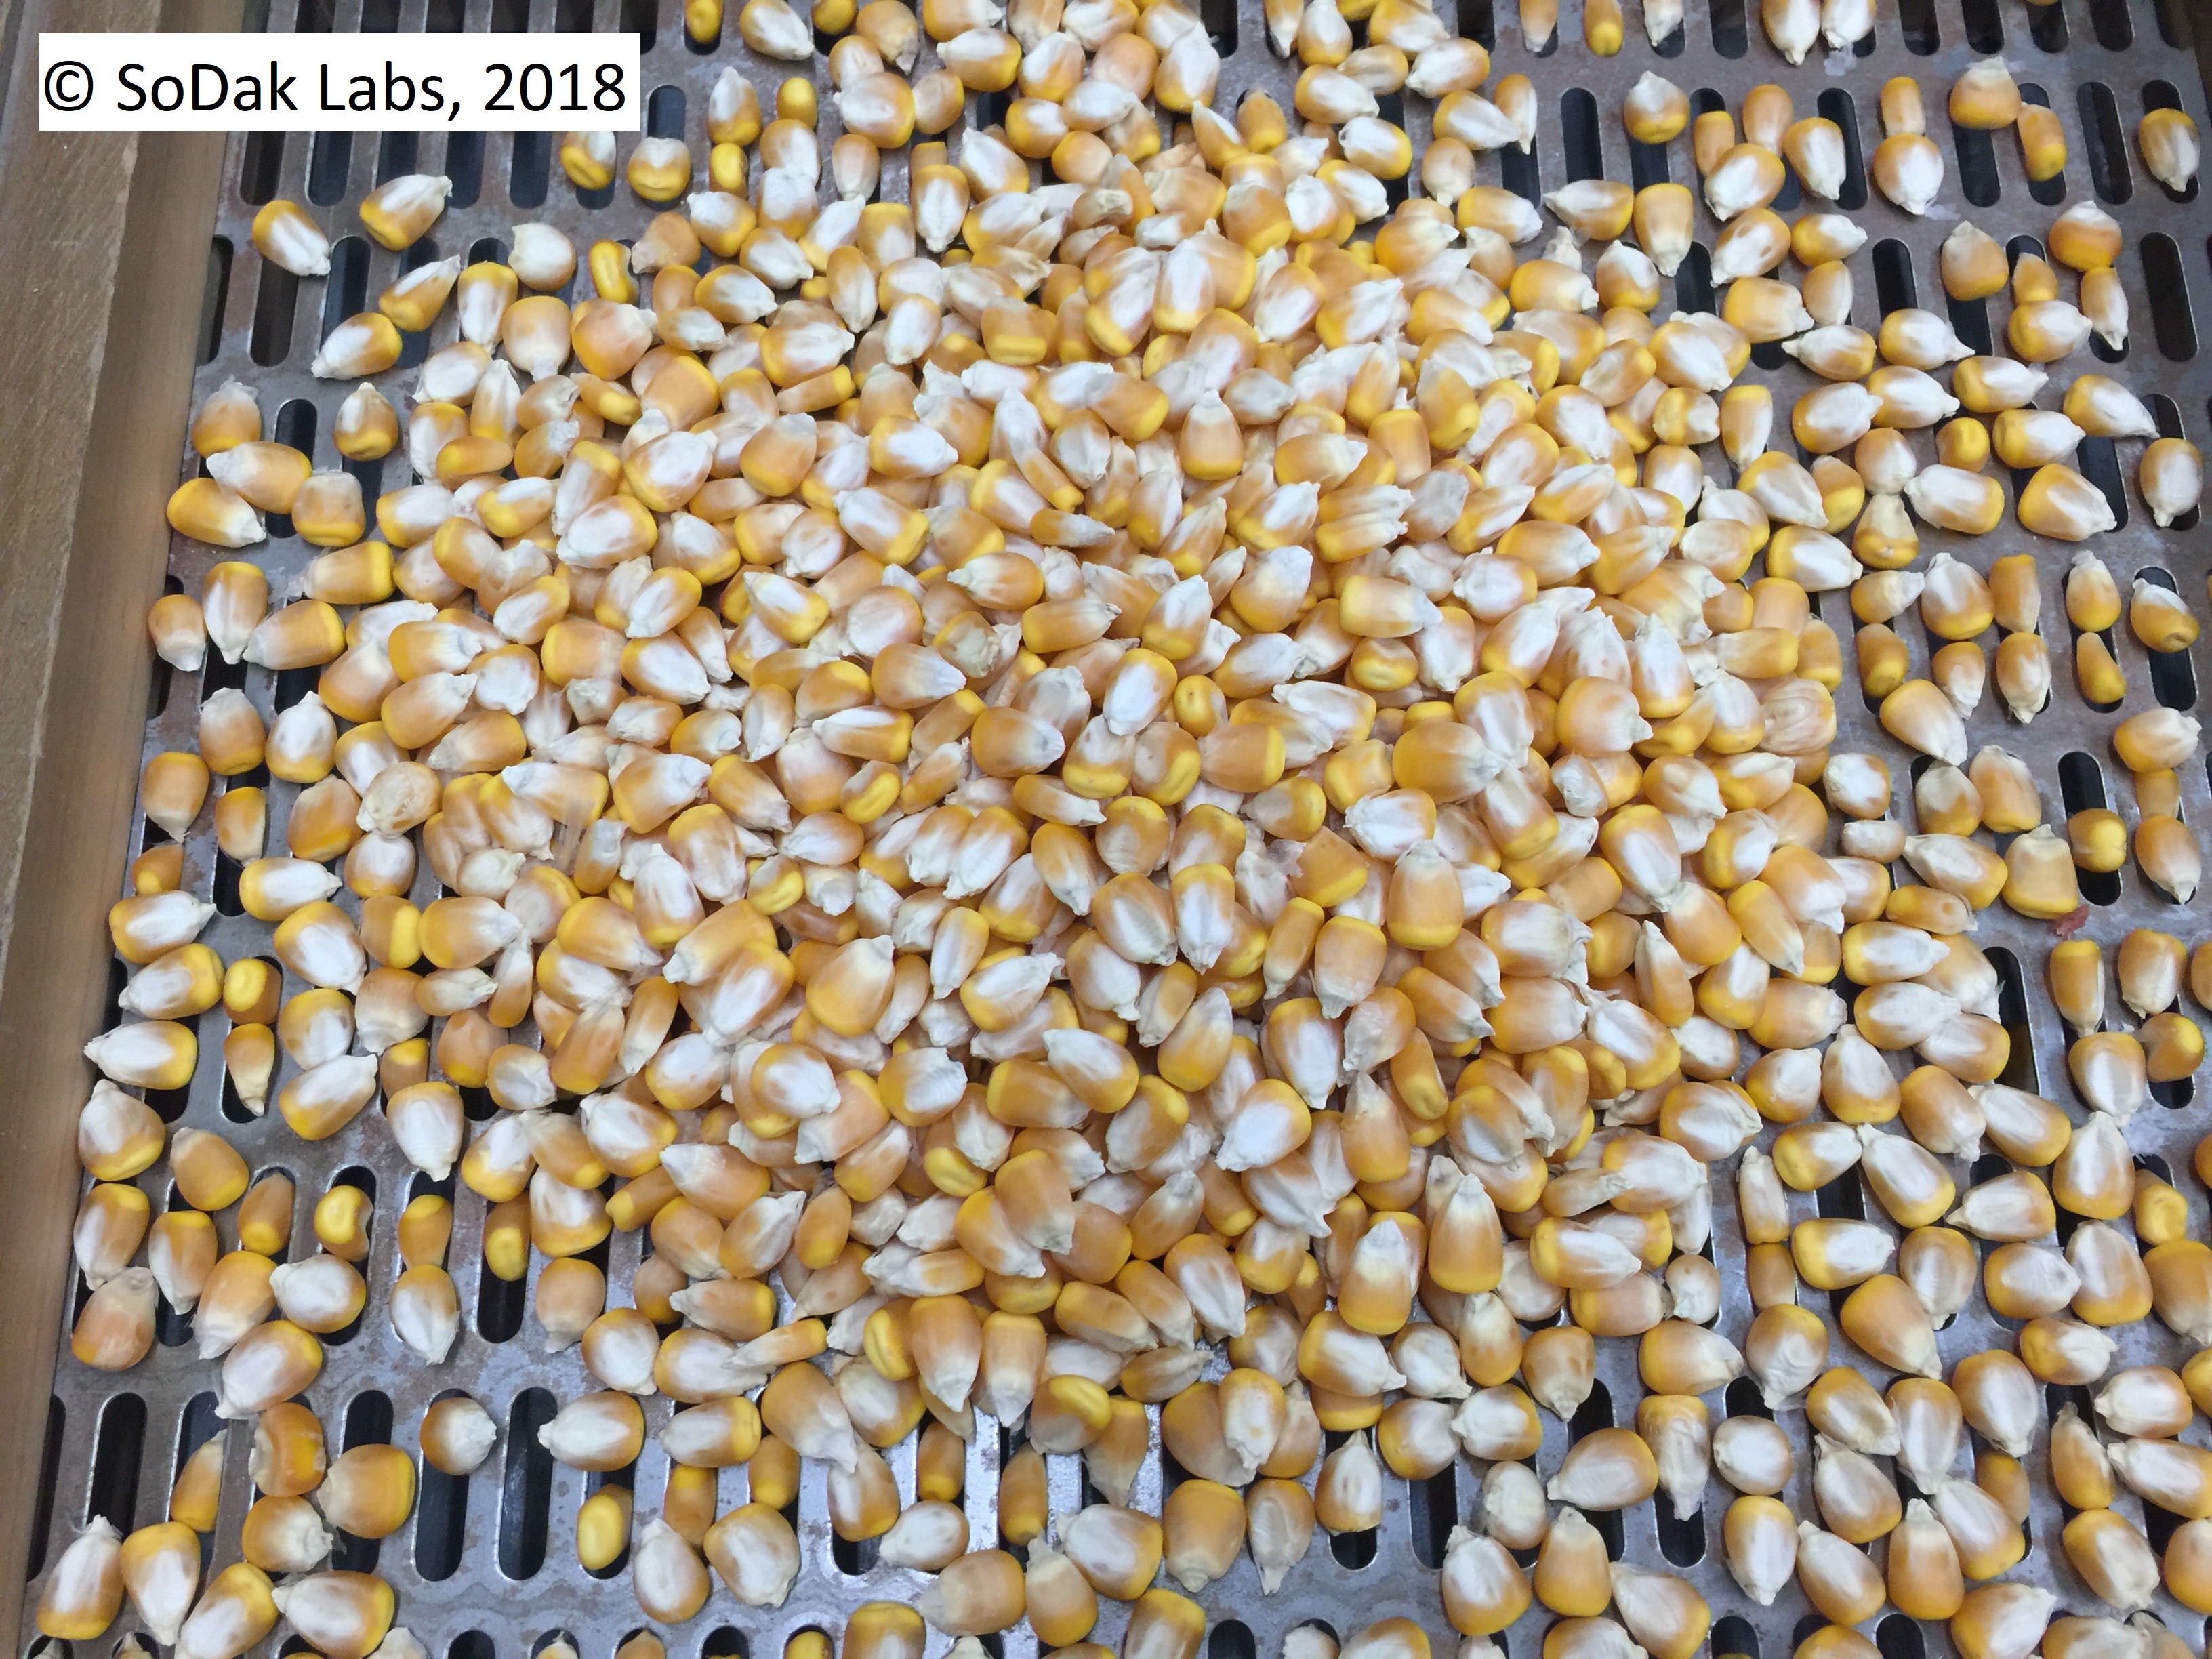 Corn seed shaken over a slotted screen for purity testing